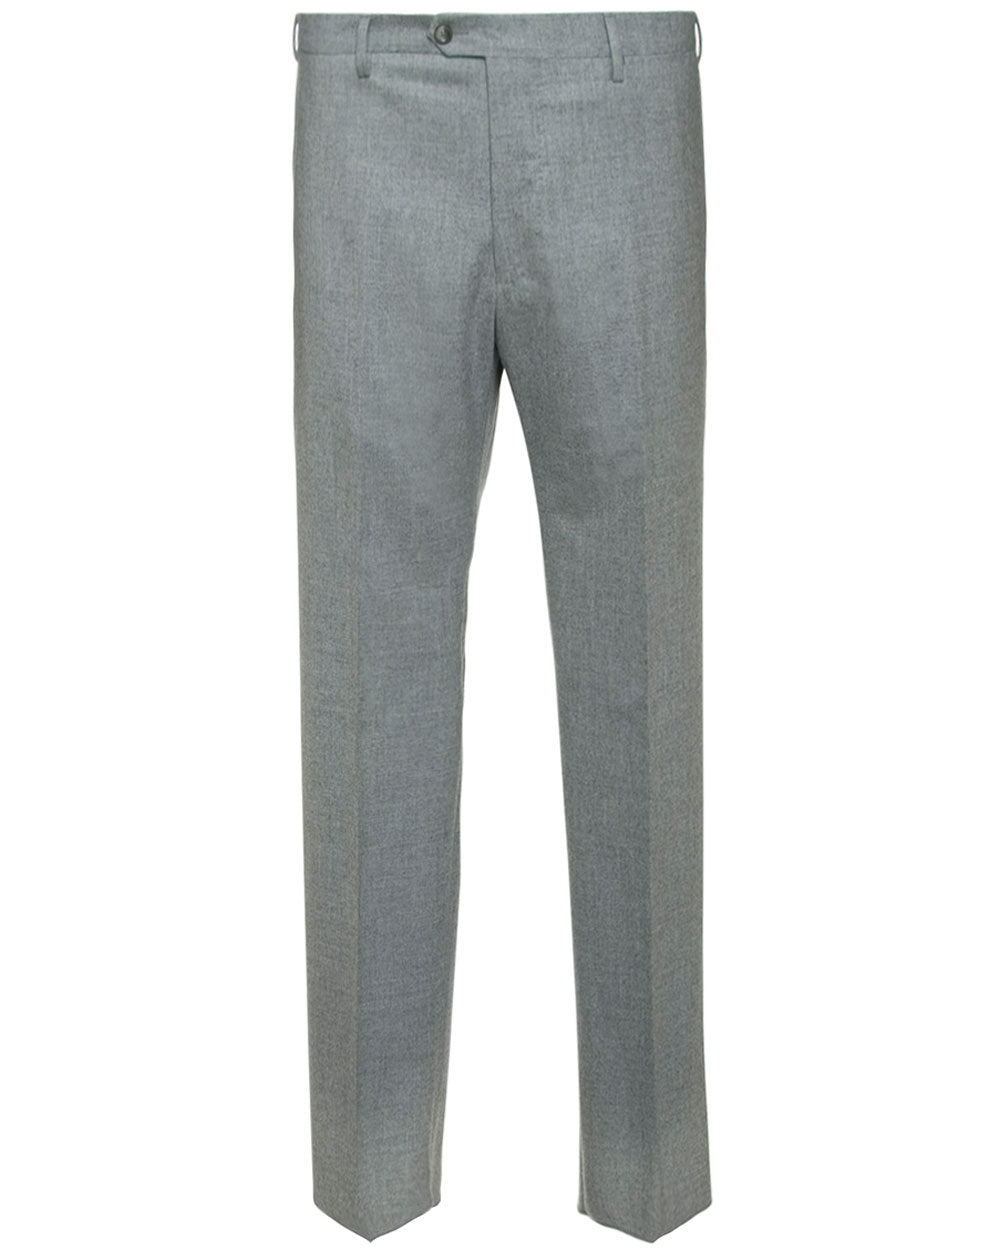 Cashmere Dress Pant in Gray